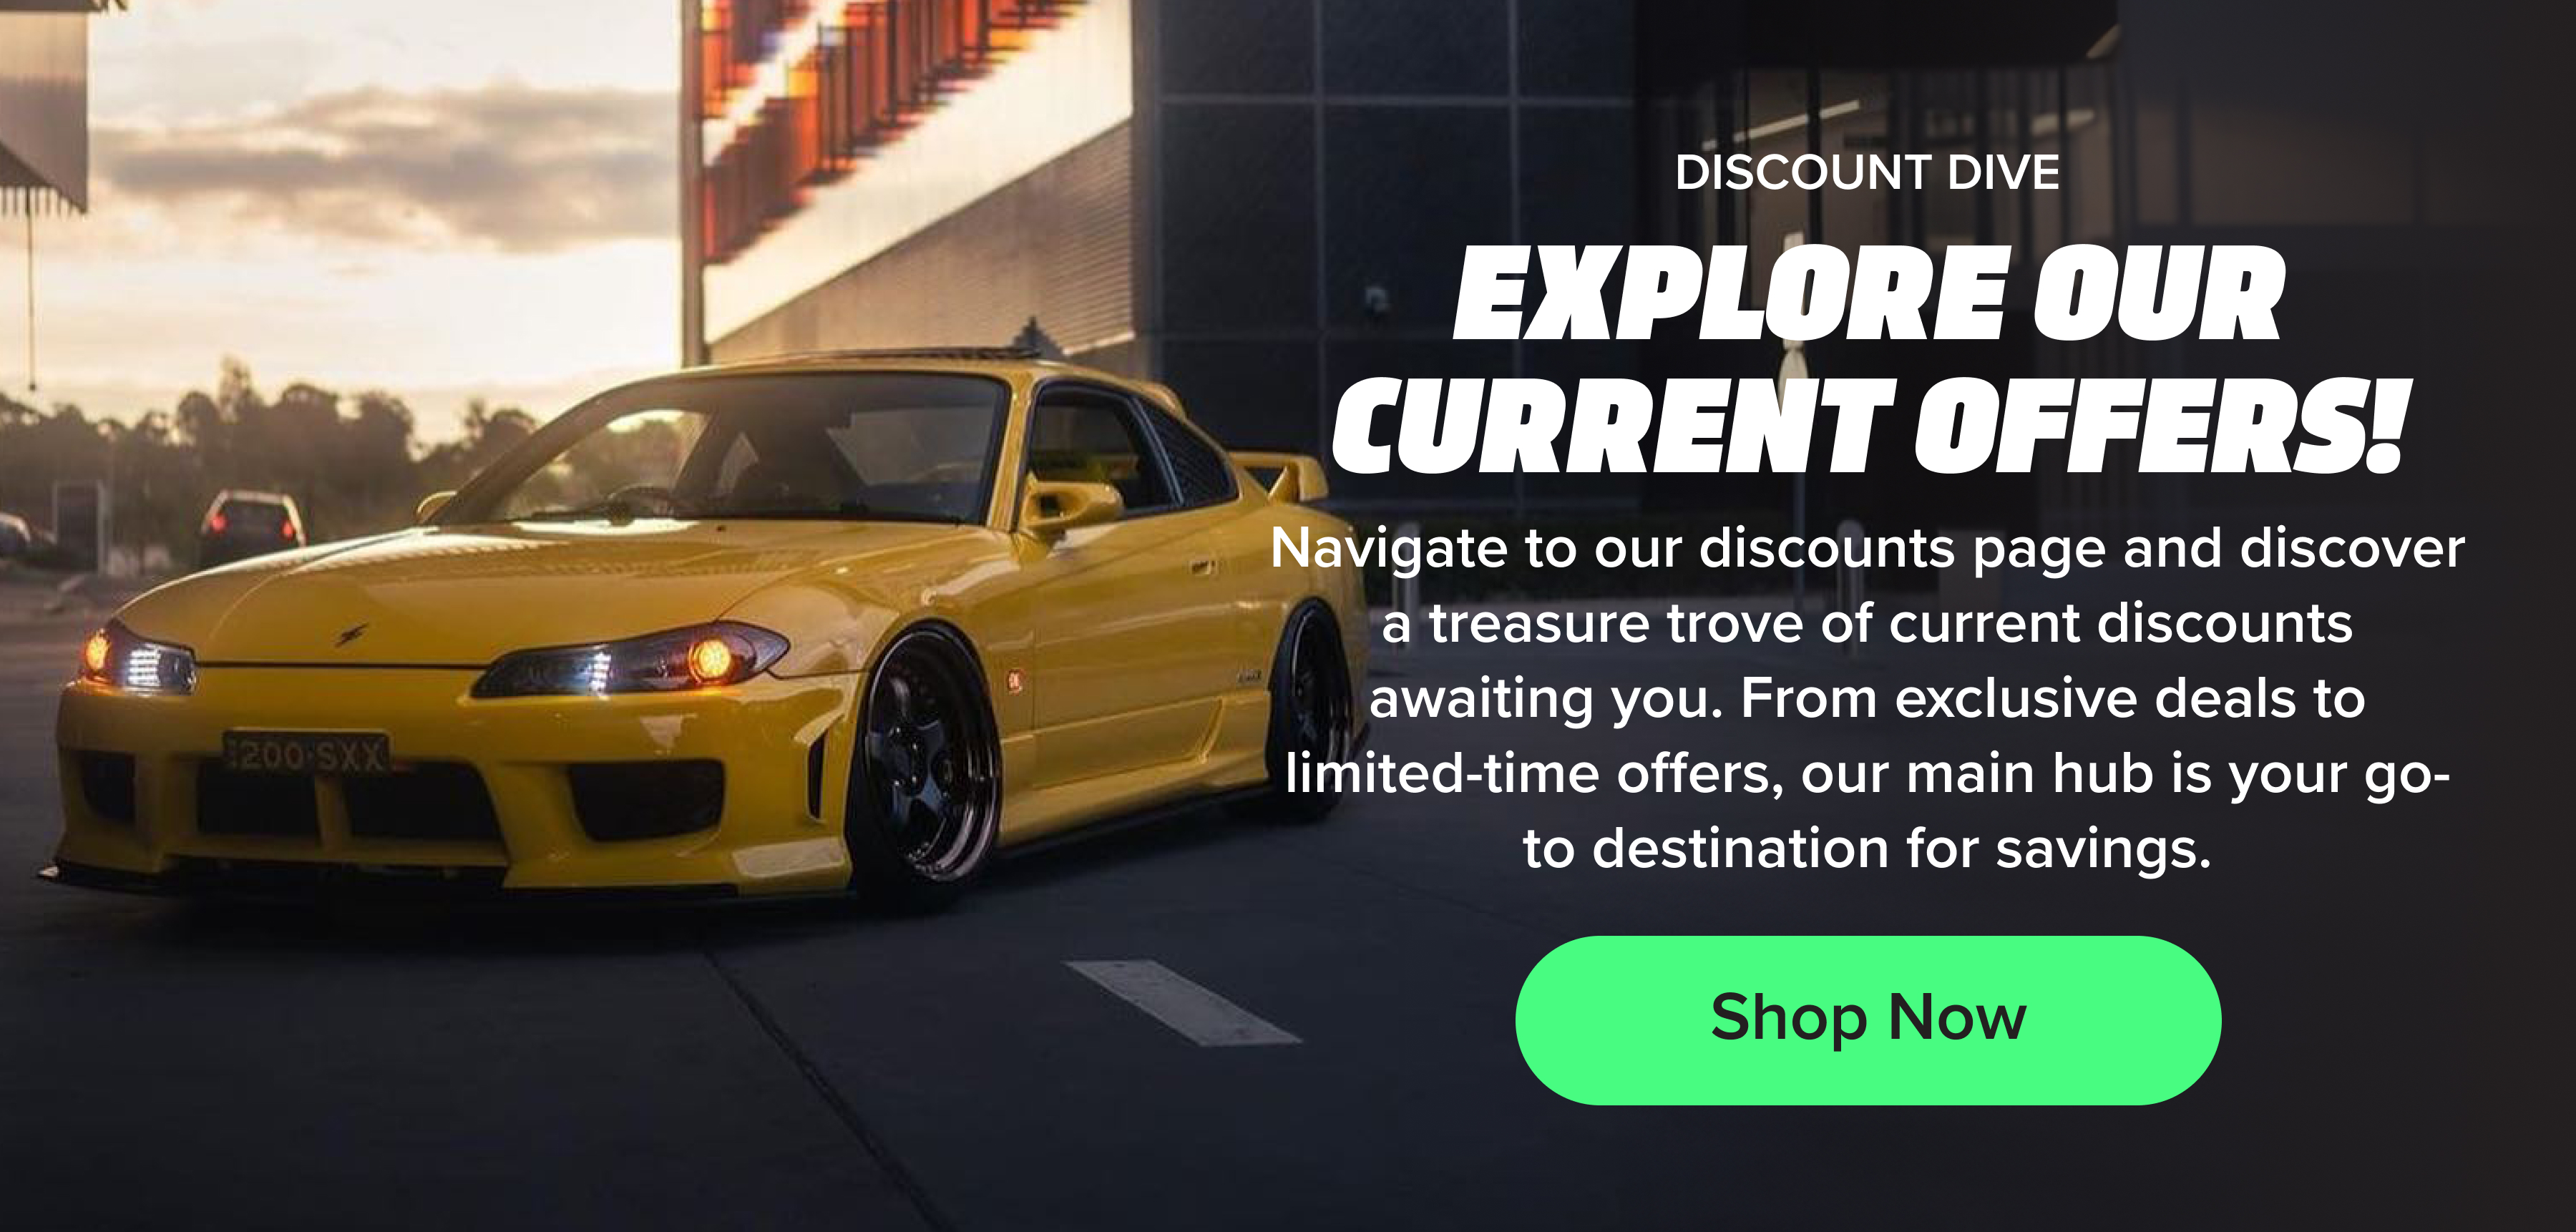 Discount Dive: Explore Our Current Offers - Navigate to our discounts page and discover a treasure trove of current discounts awaiting you. From exclusive deals to limited-time offers, our main hub is your go-to destination for savings [Shop Now]